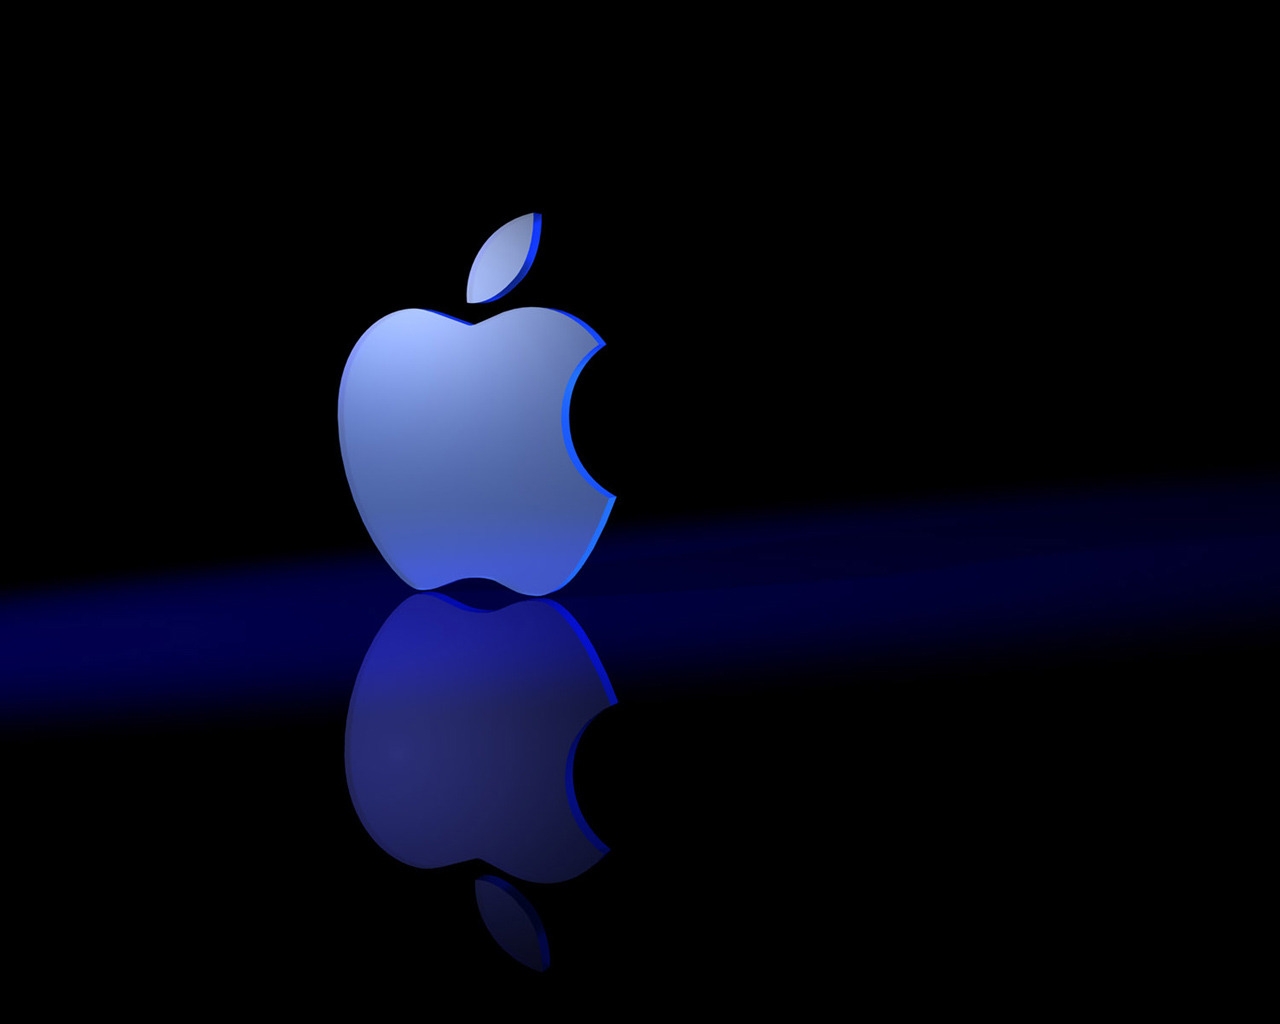 Great Blue Apple for 1280 x 1024 resolution